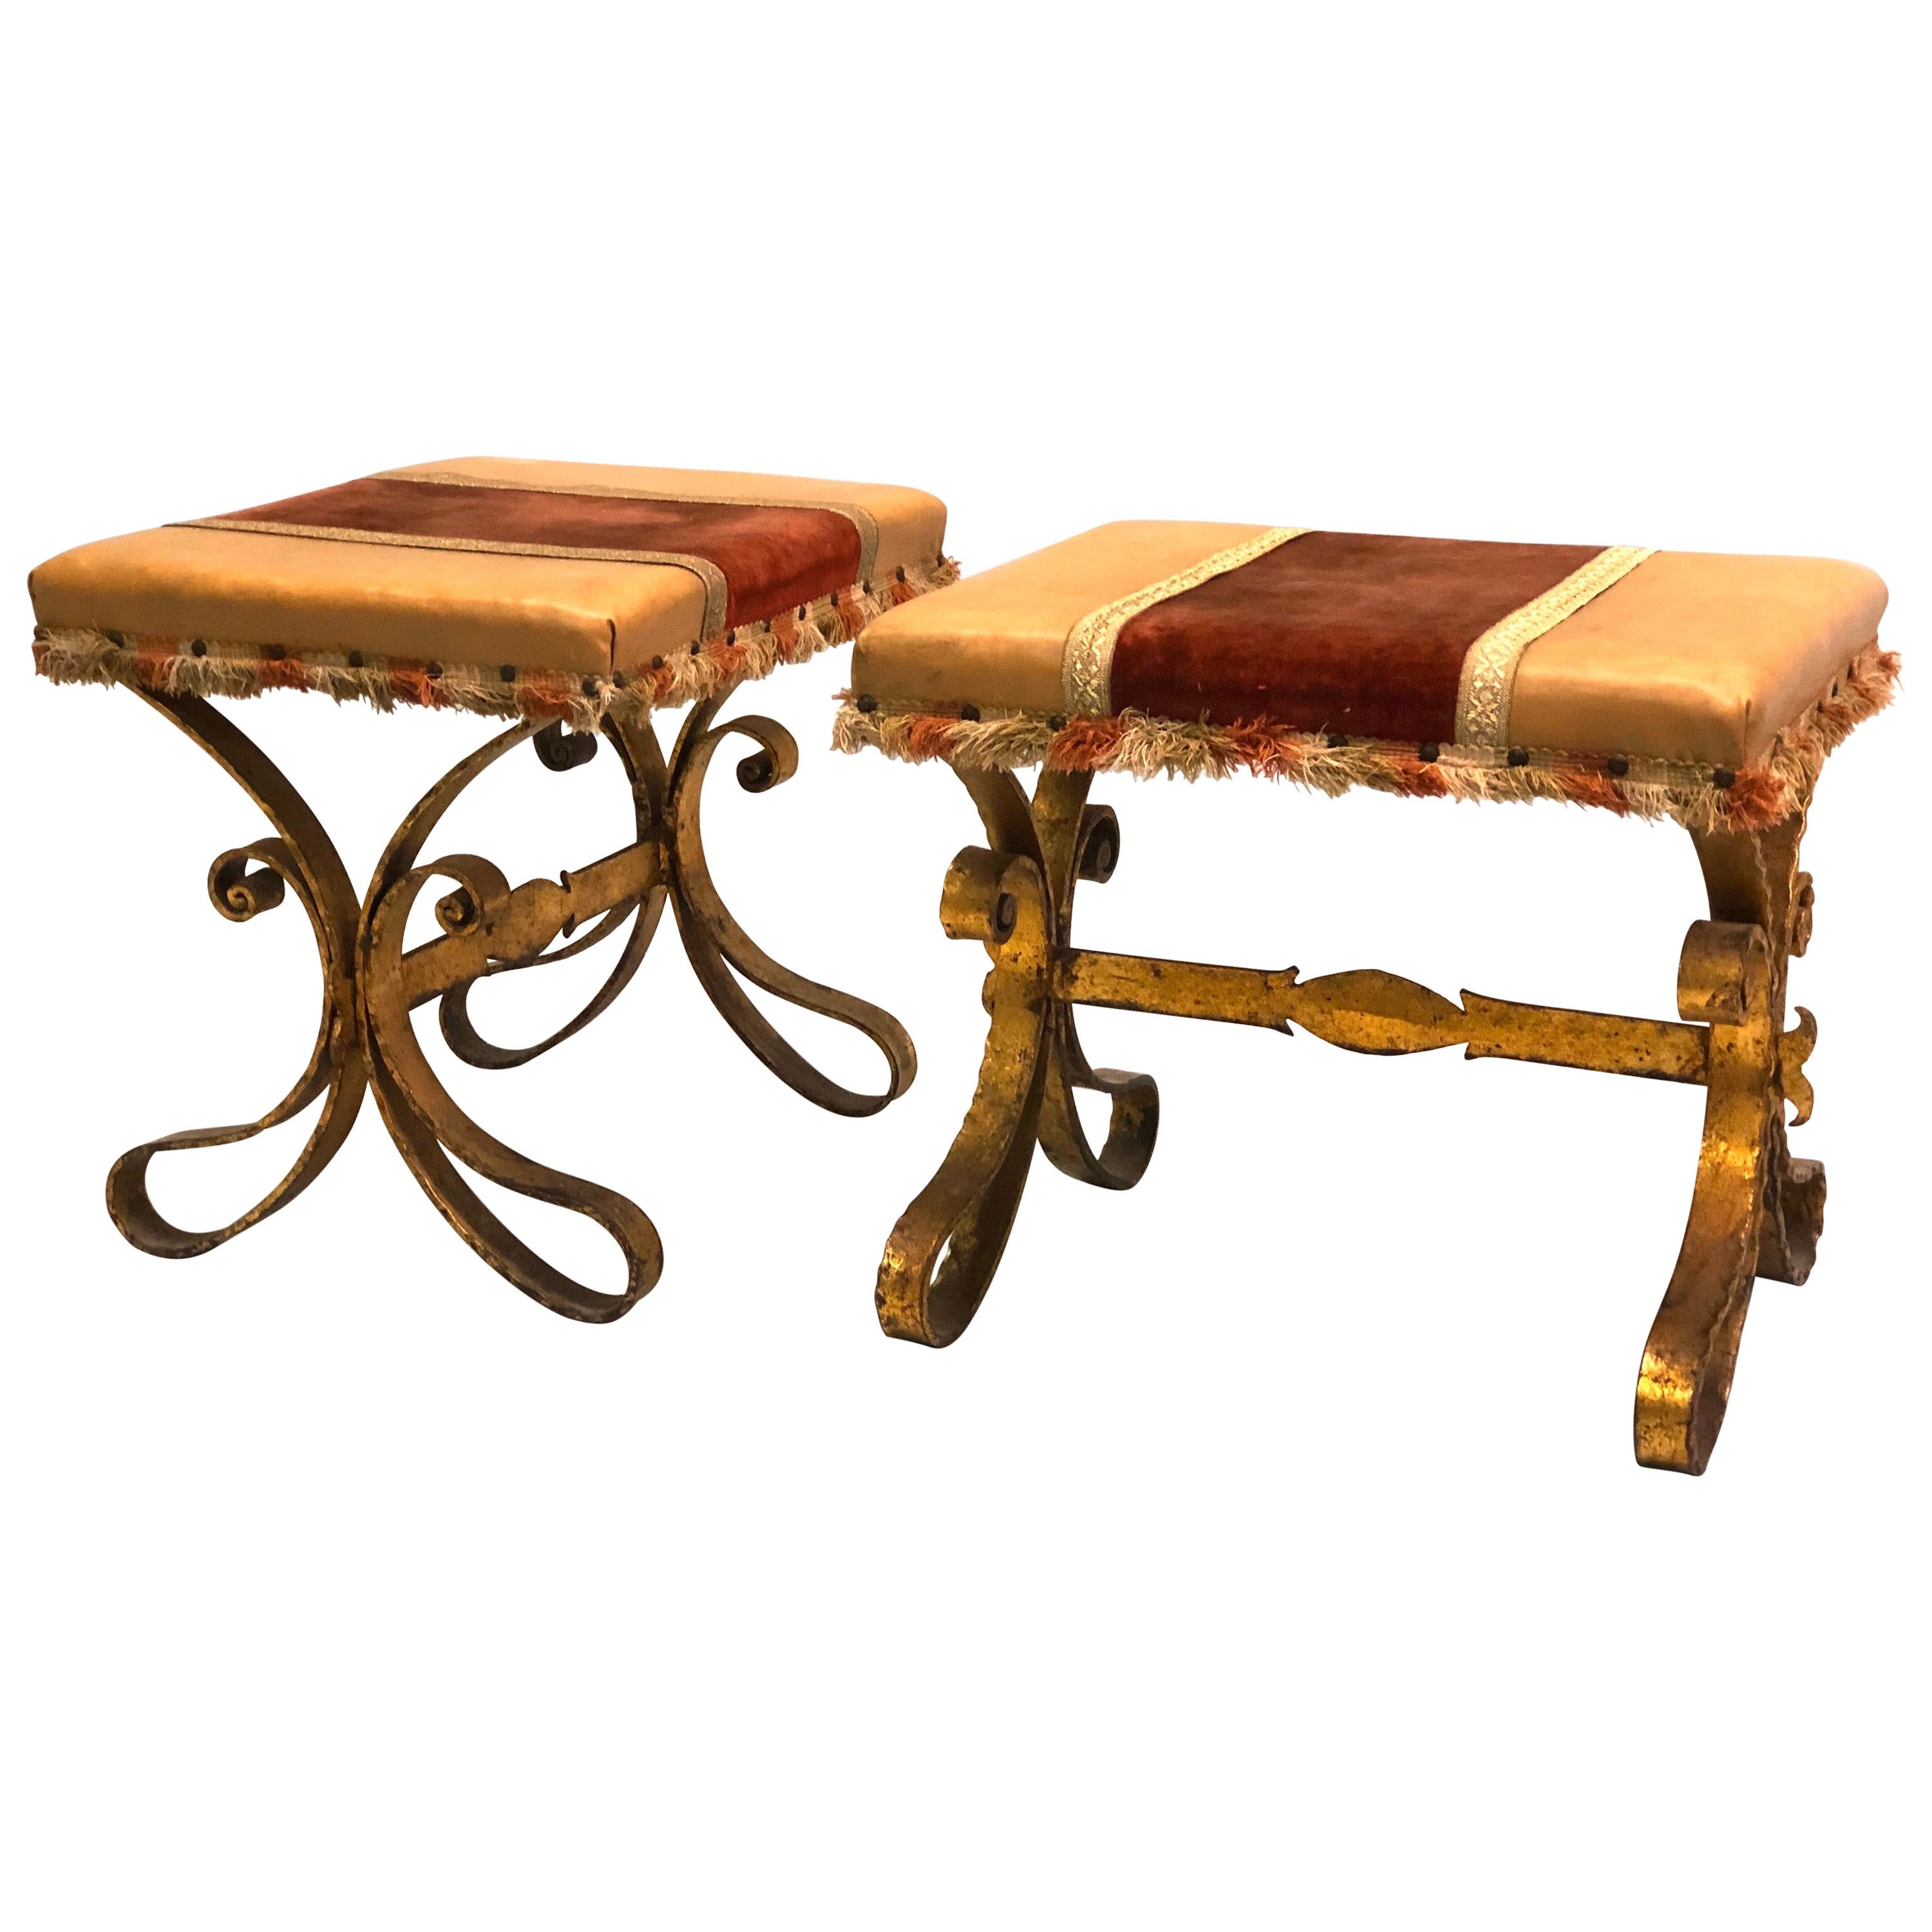 French Midcentury Gilt Wrought Iron and Leather Benches, Gilbert Poillerat, Pair